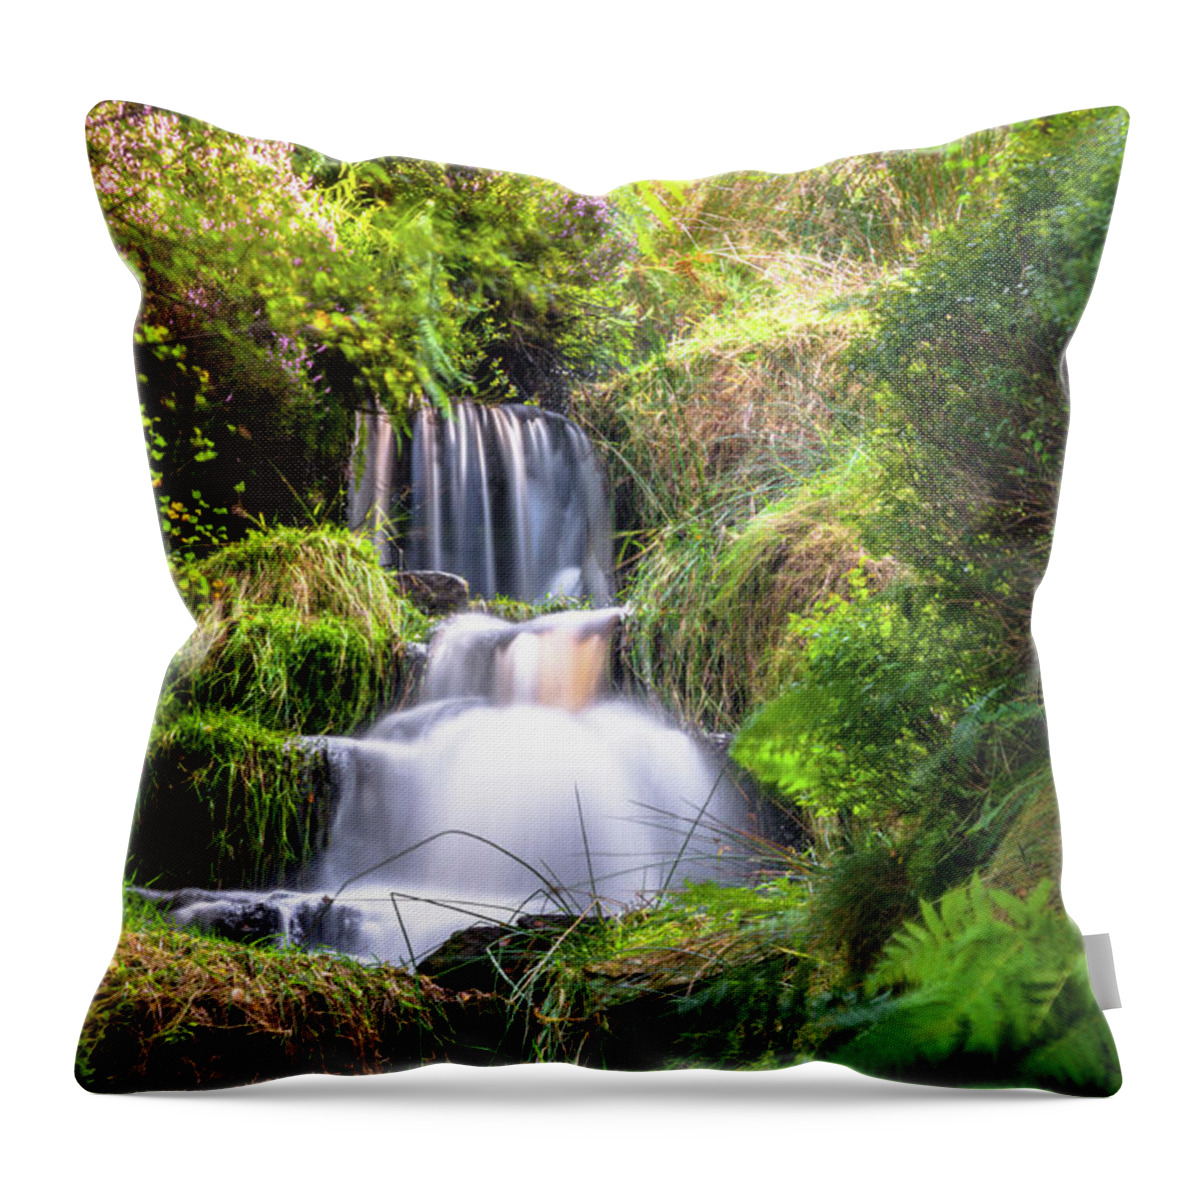 Airedale Throw Pillow featuring the photograph Bronte Waterfall by Mariusz Talarek